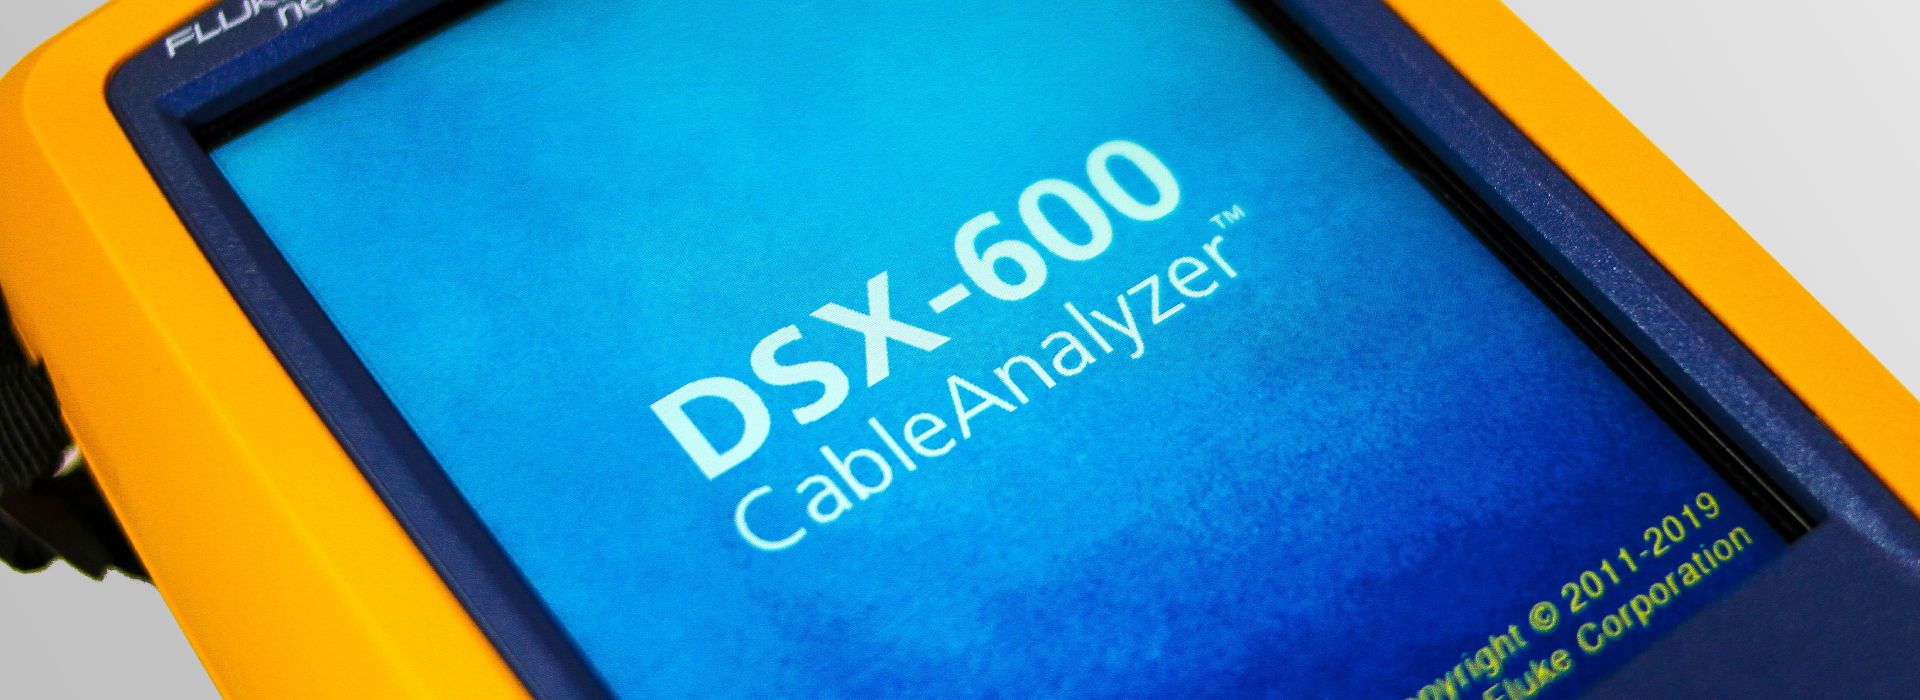 DSX 600 Cable Analyzer - VM Redes